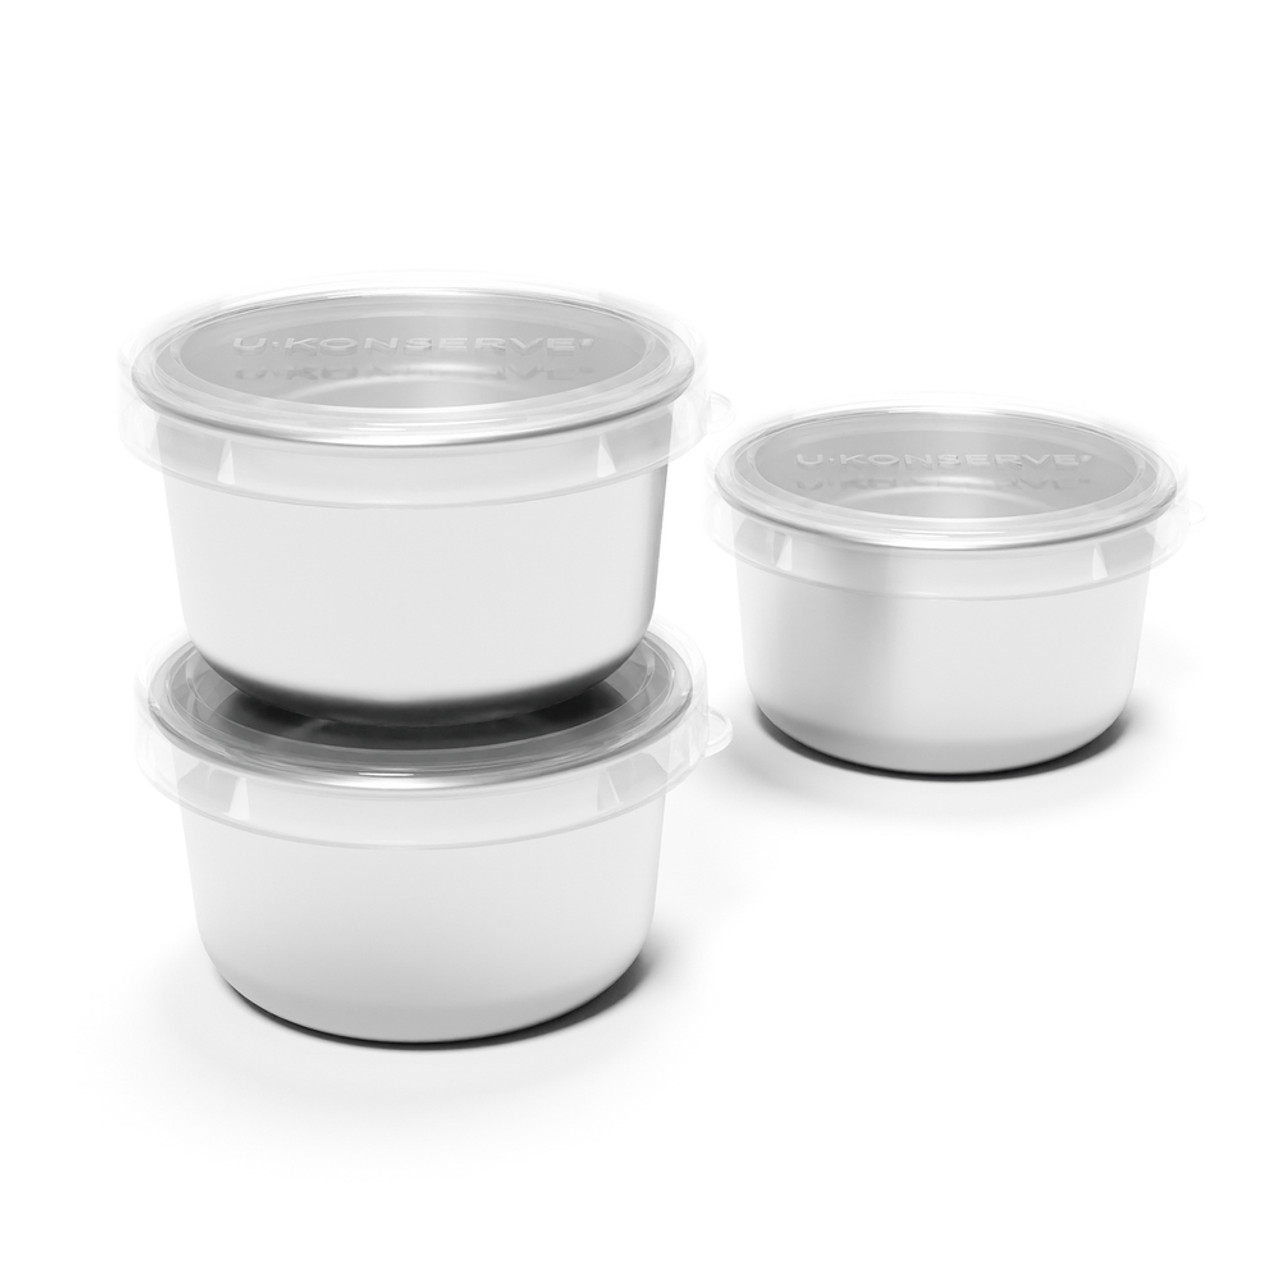 Ukonserve Stainless Steel Dip Containers with Silicone Lid (Set of 3)